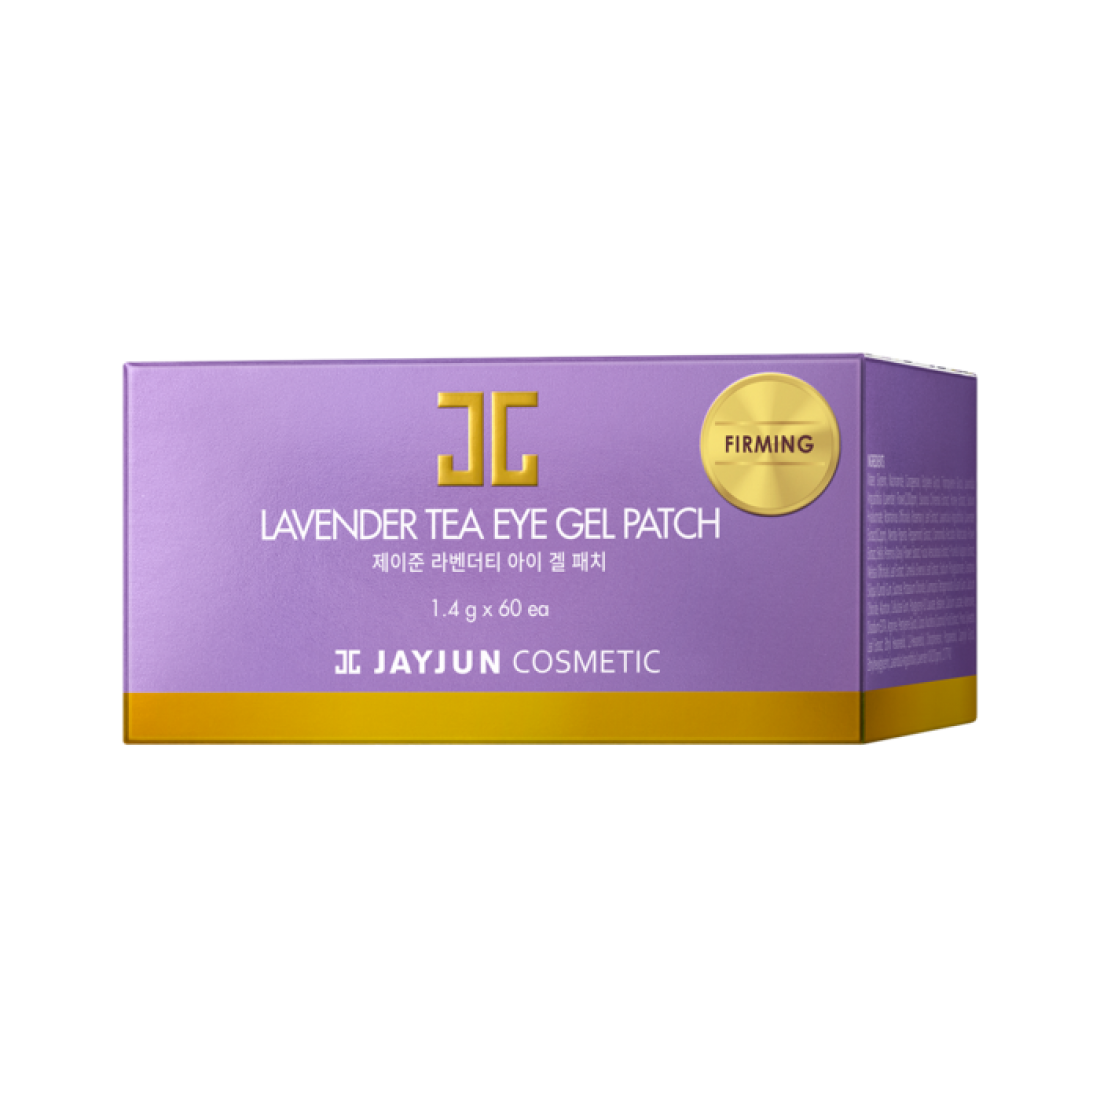 Патчи eye gel patches. Патчи JAYJUN. Патчи Perilla ocymoides. JAYJUN Eye Gel Patch Lavender Tea Mask. Perilla ocymoides Eye Gel Patch.